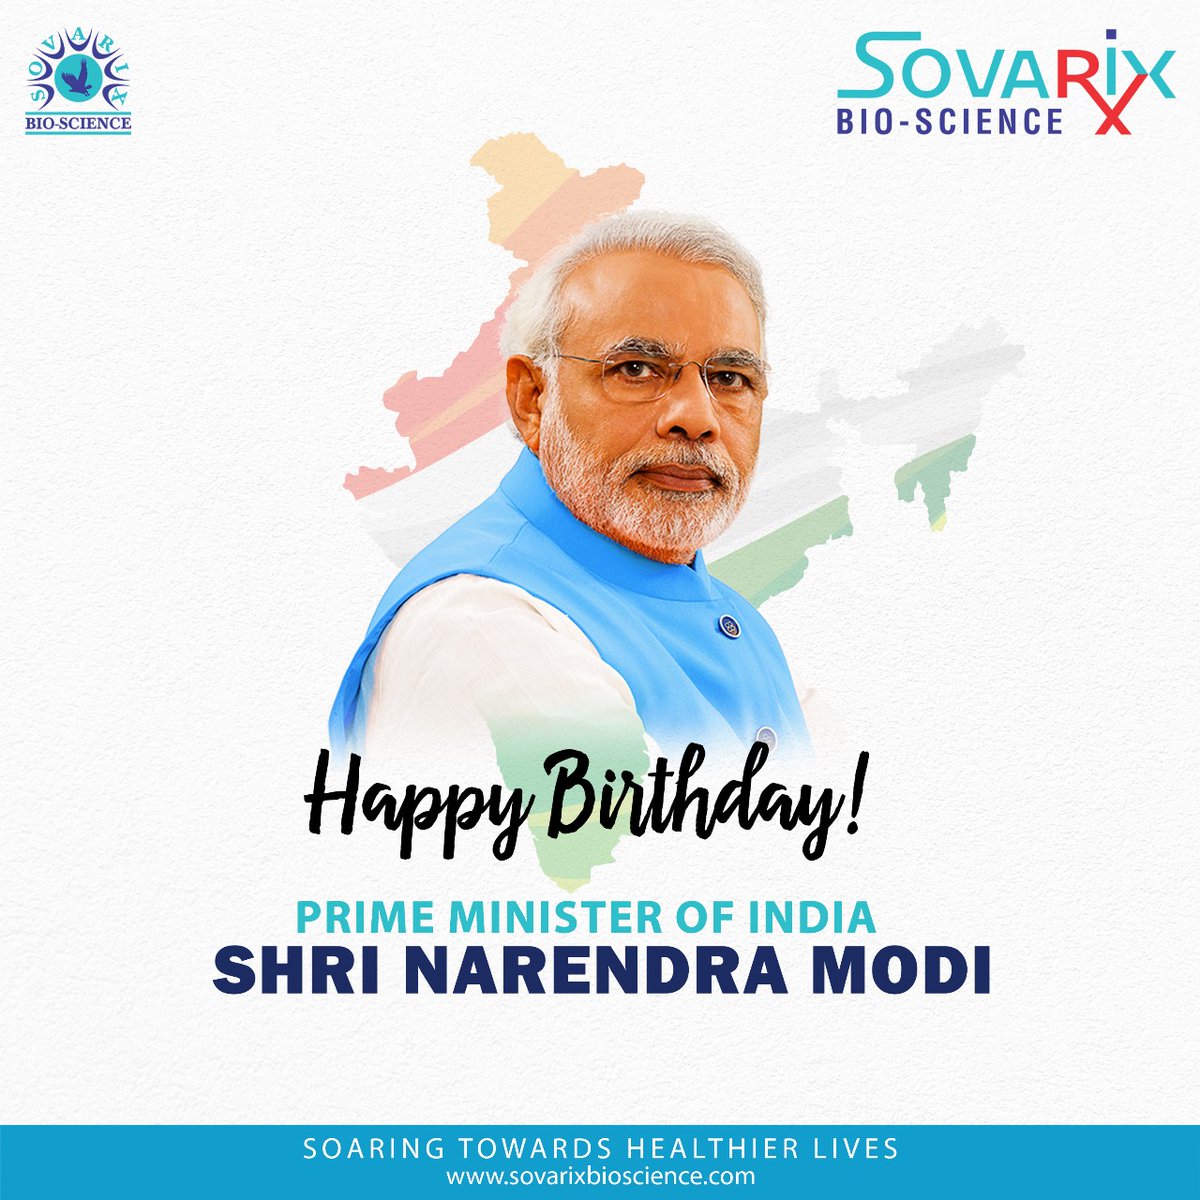 Happy Birthday to our visionary leader, Shri #NarendraModi
Your dedication to the nation is an inspiration to us all. May your wisdom and energy continue to drive India to new heights. #Sovarix #Namo #India #sovarixbioscience #pediatricmedicine #soaringtowardshealthierlives